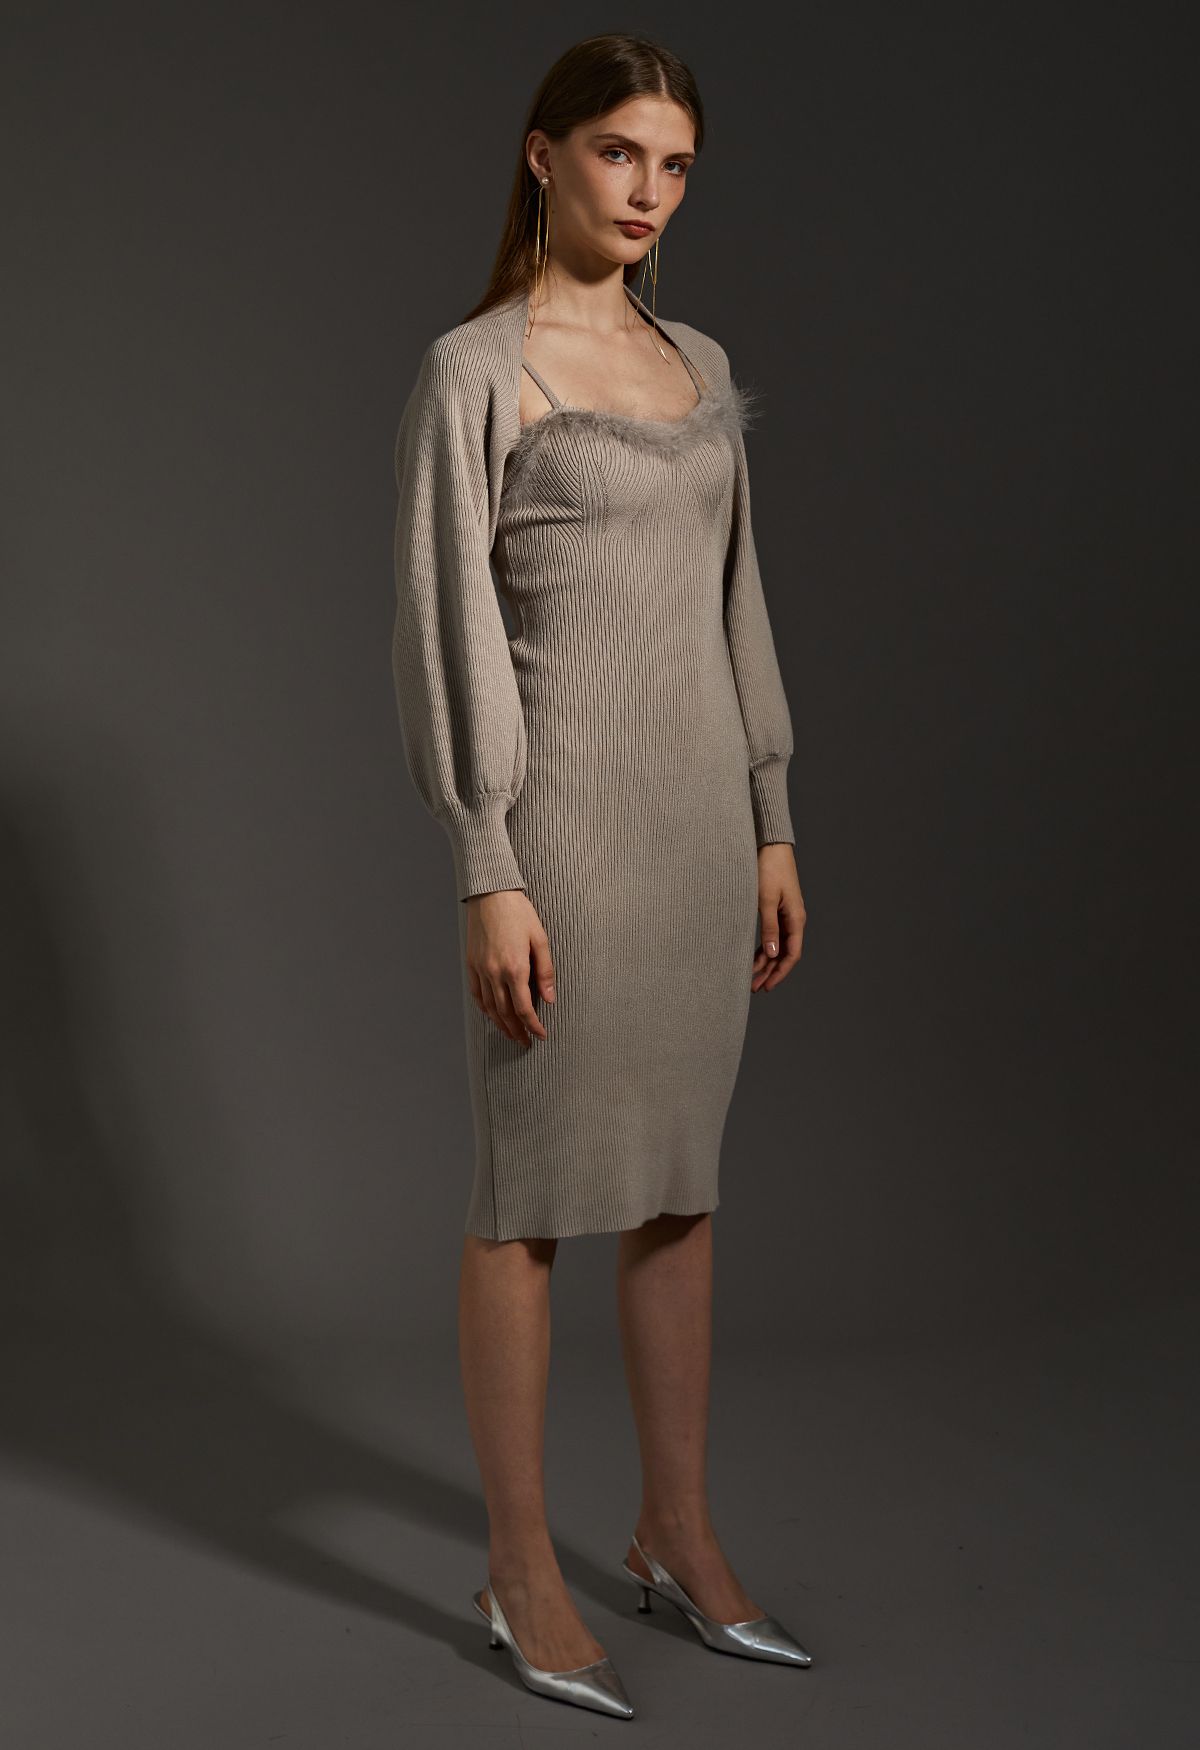 Feathered Ribbed Knit Twinset Dress in Taupe